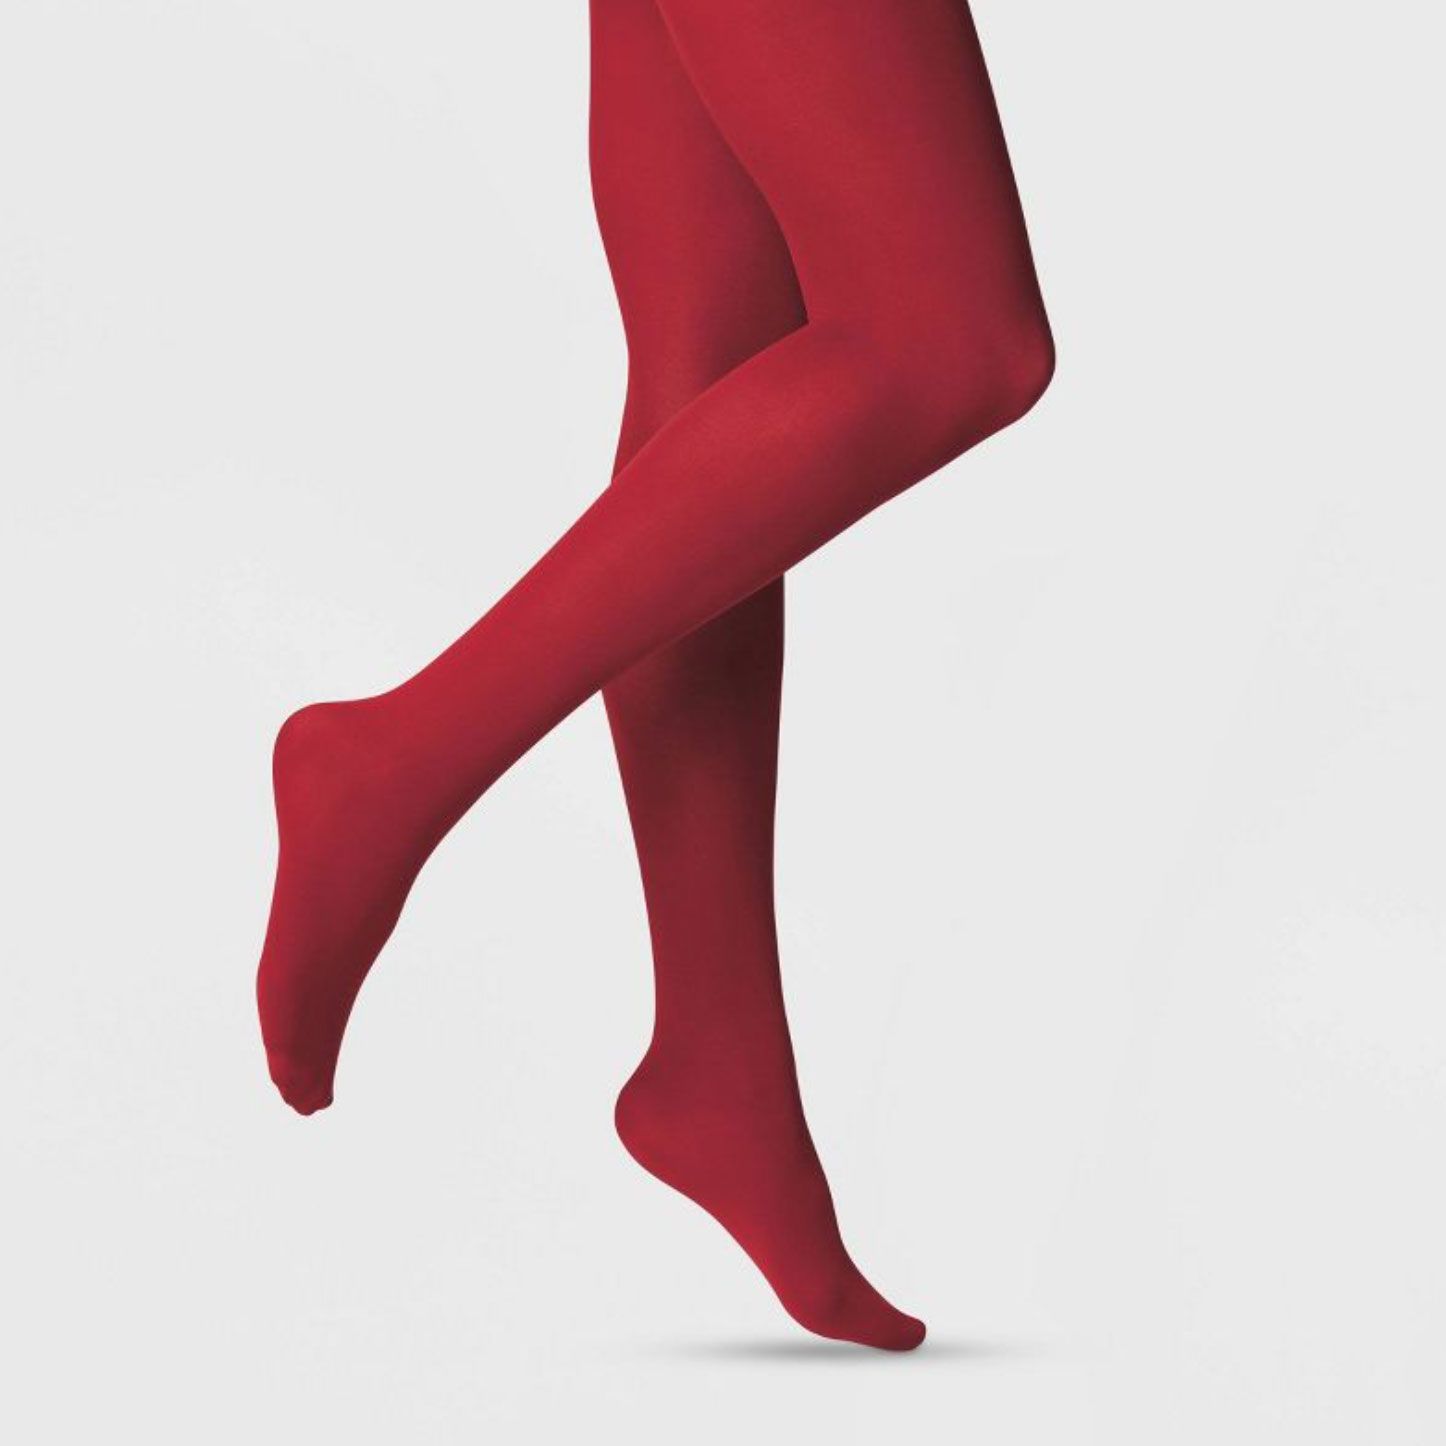 Red Socks and Tights Are In And We're Here For It